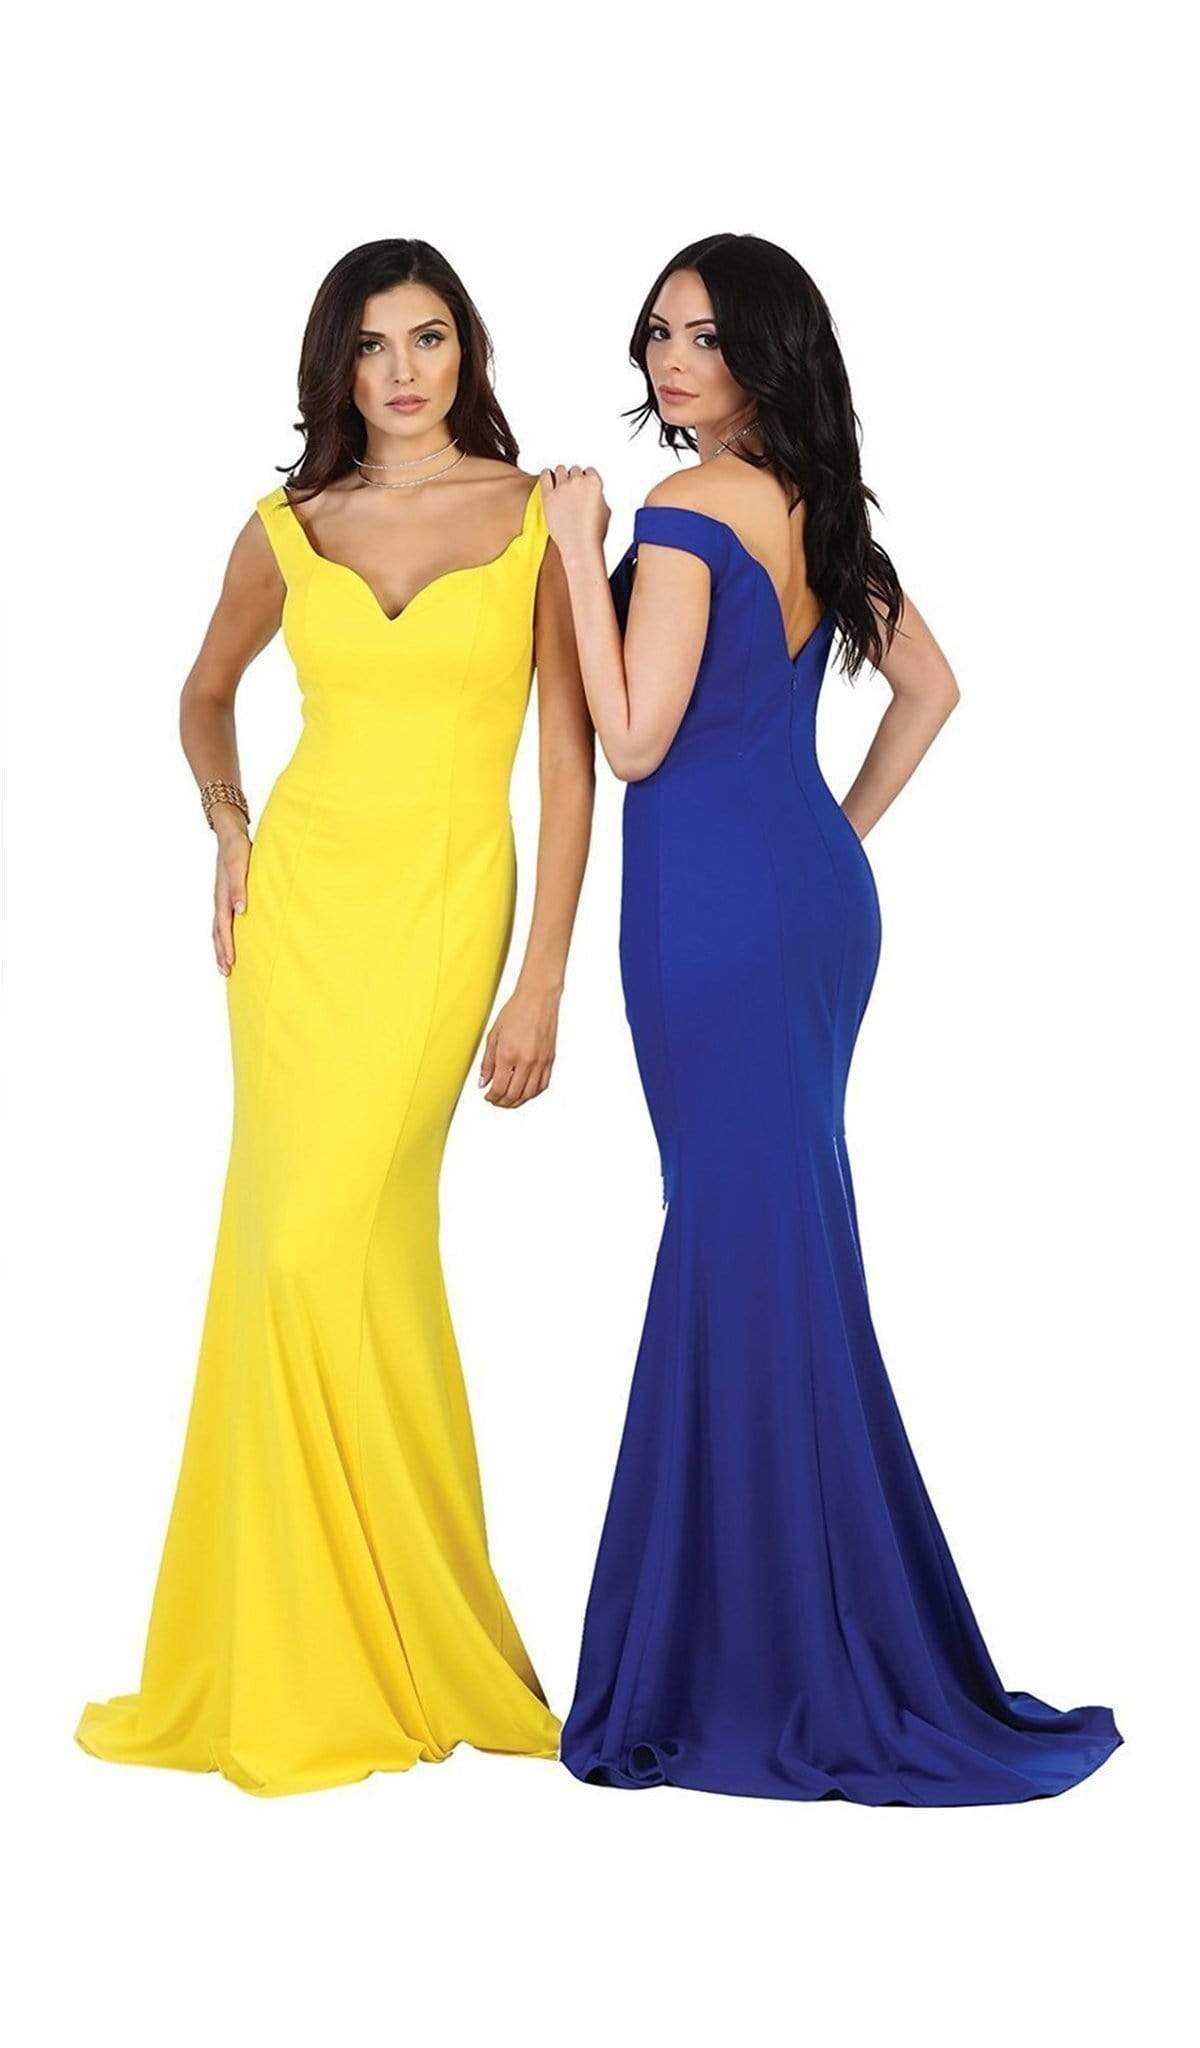 May Queen - MQ1489 Off Shoulder Long Sheath Evening Gown Bridesmaid Dresses